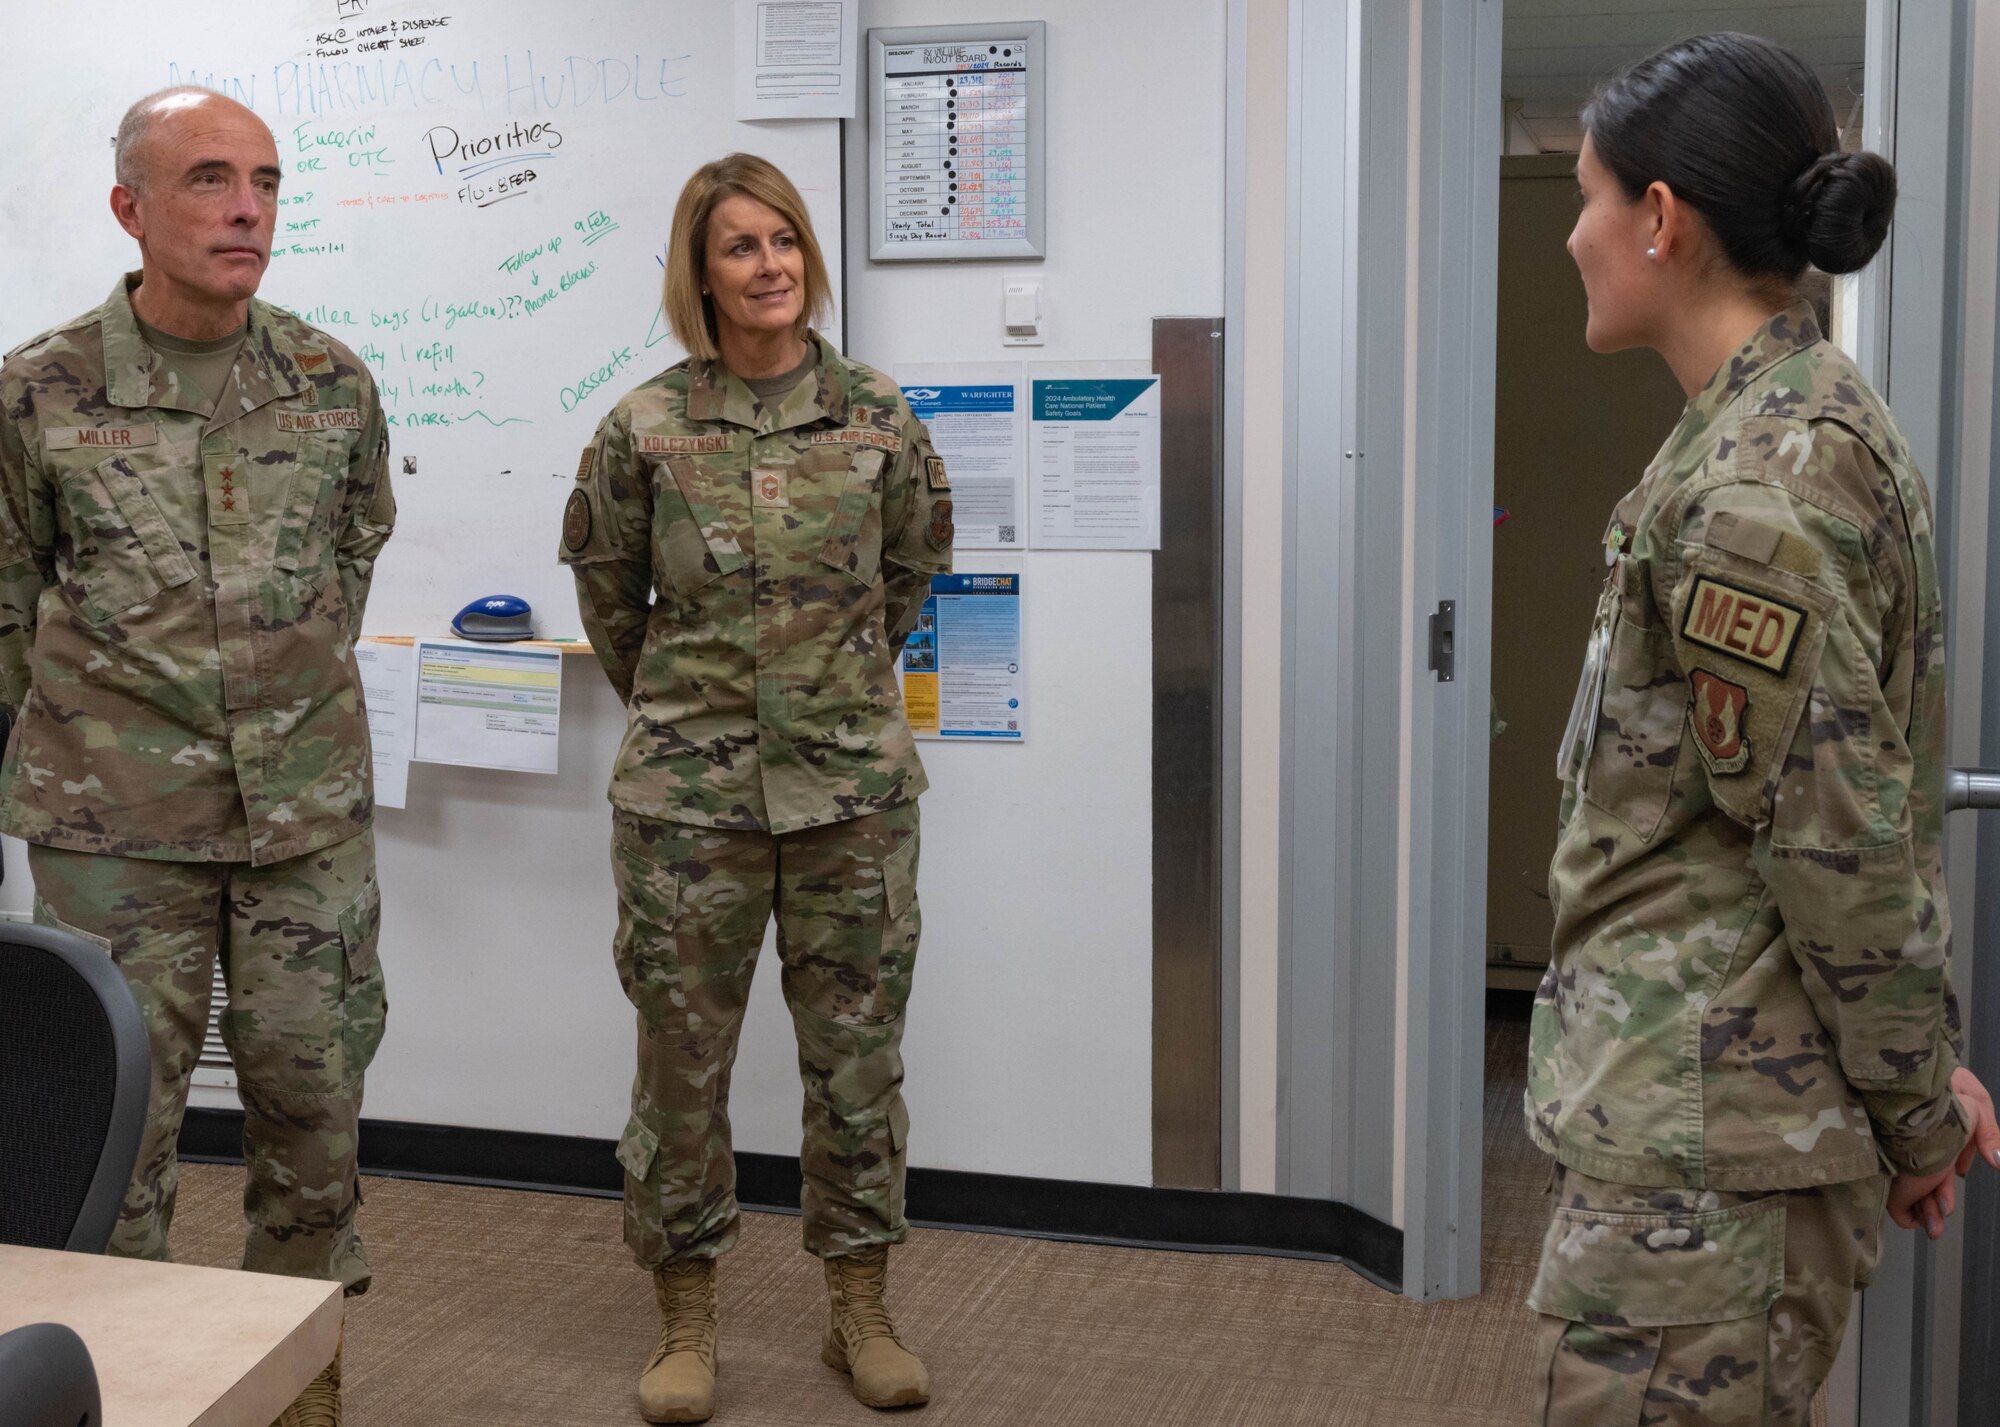 Lt. Gen. Miller and Chief Master Sgt. Dawn Kolcynski stand while being briefed by Staff Sgt. Baca.